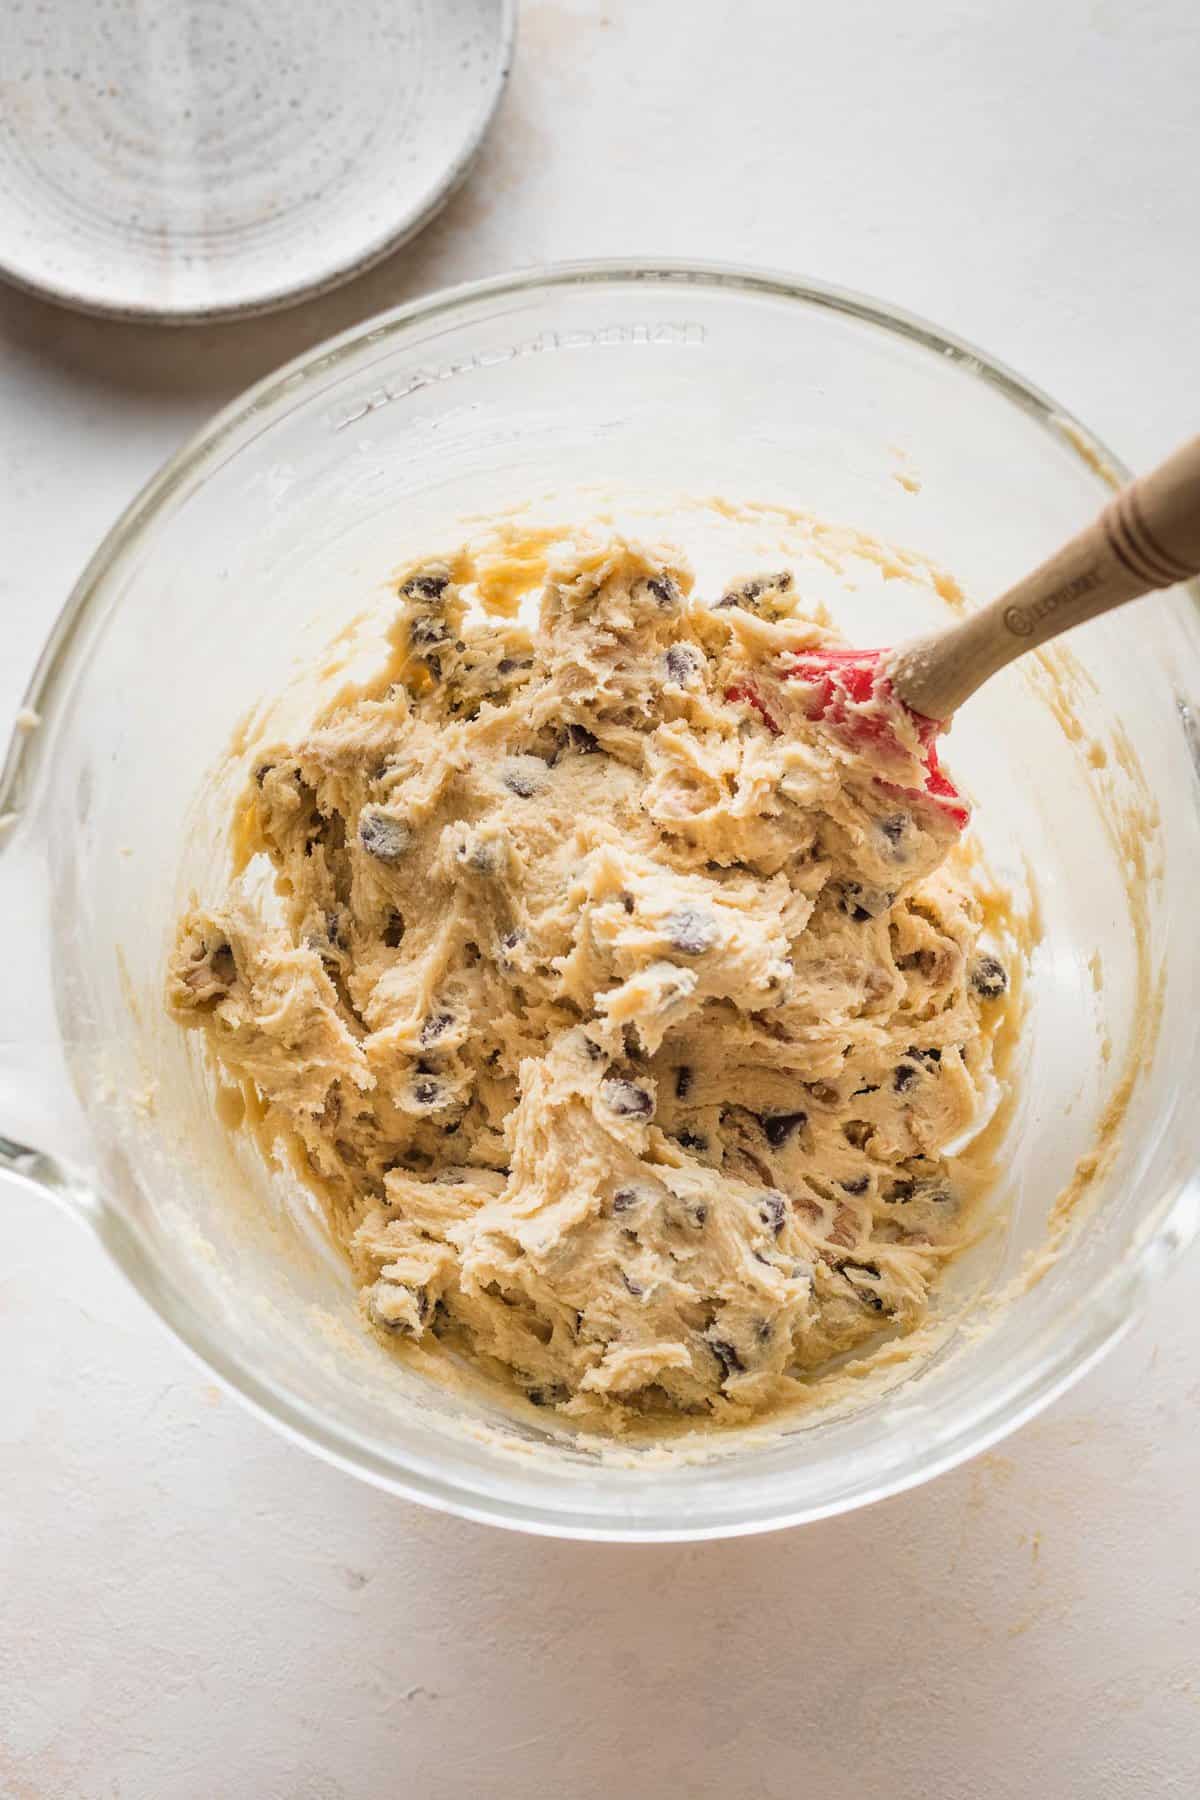 walnut and chocolate chip cookie dough all mixed together